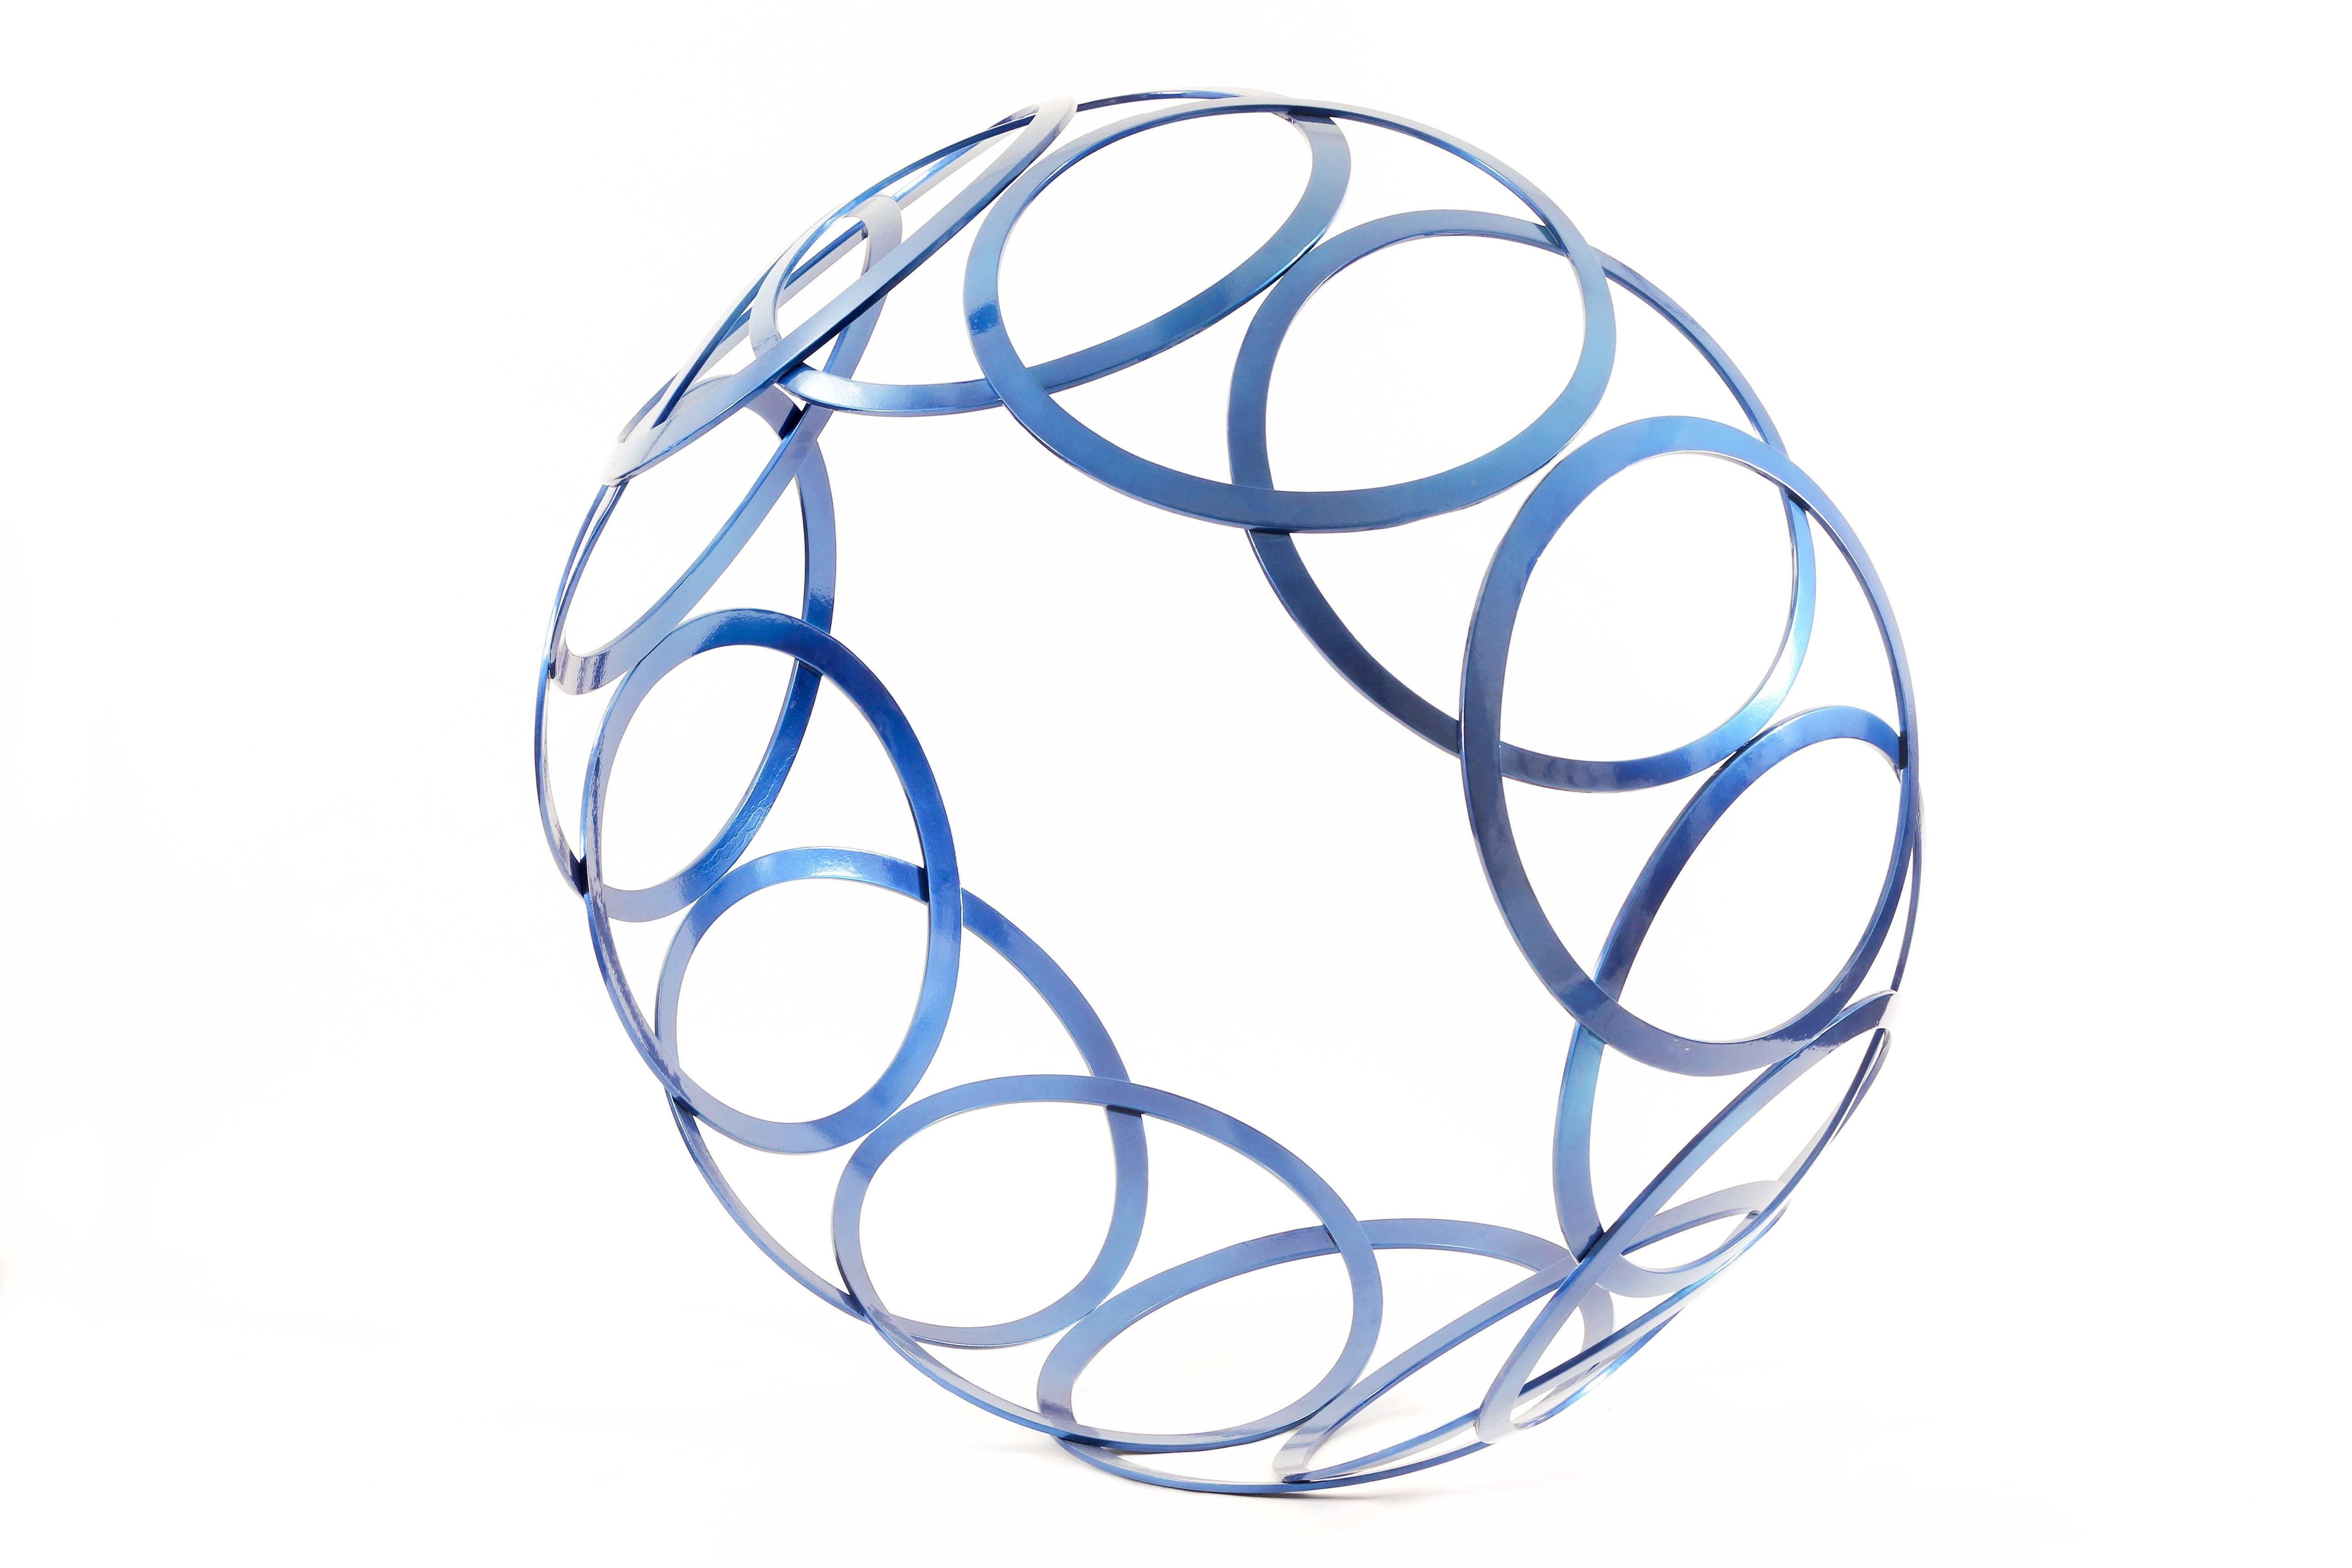 Circular Motion - large, bright blue, geometric abstract, coated steel sculpture - Sculpture by Shayne Dark